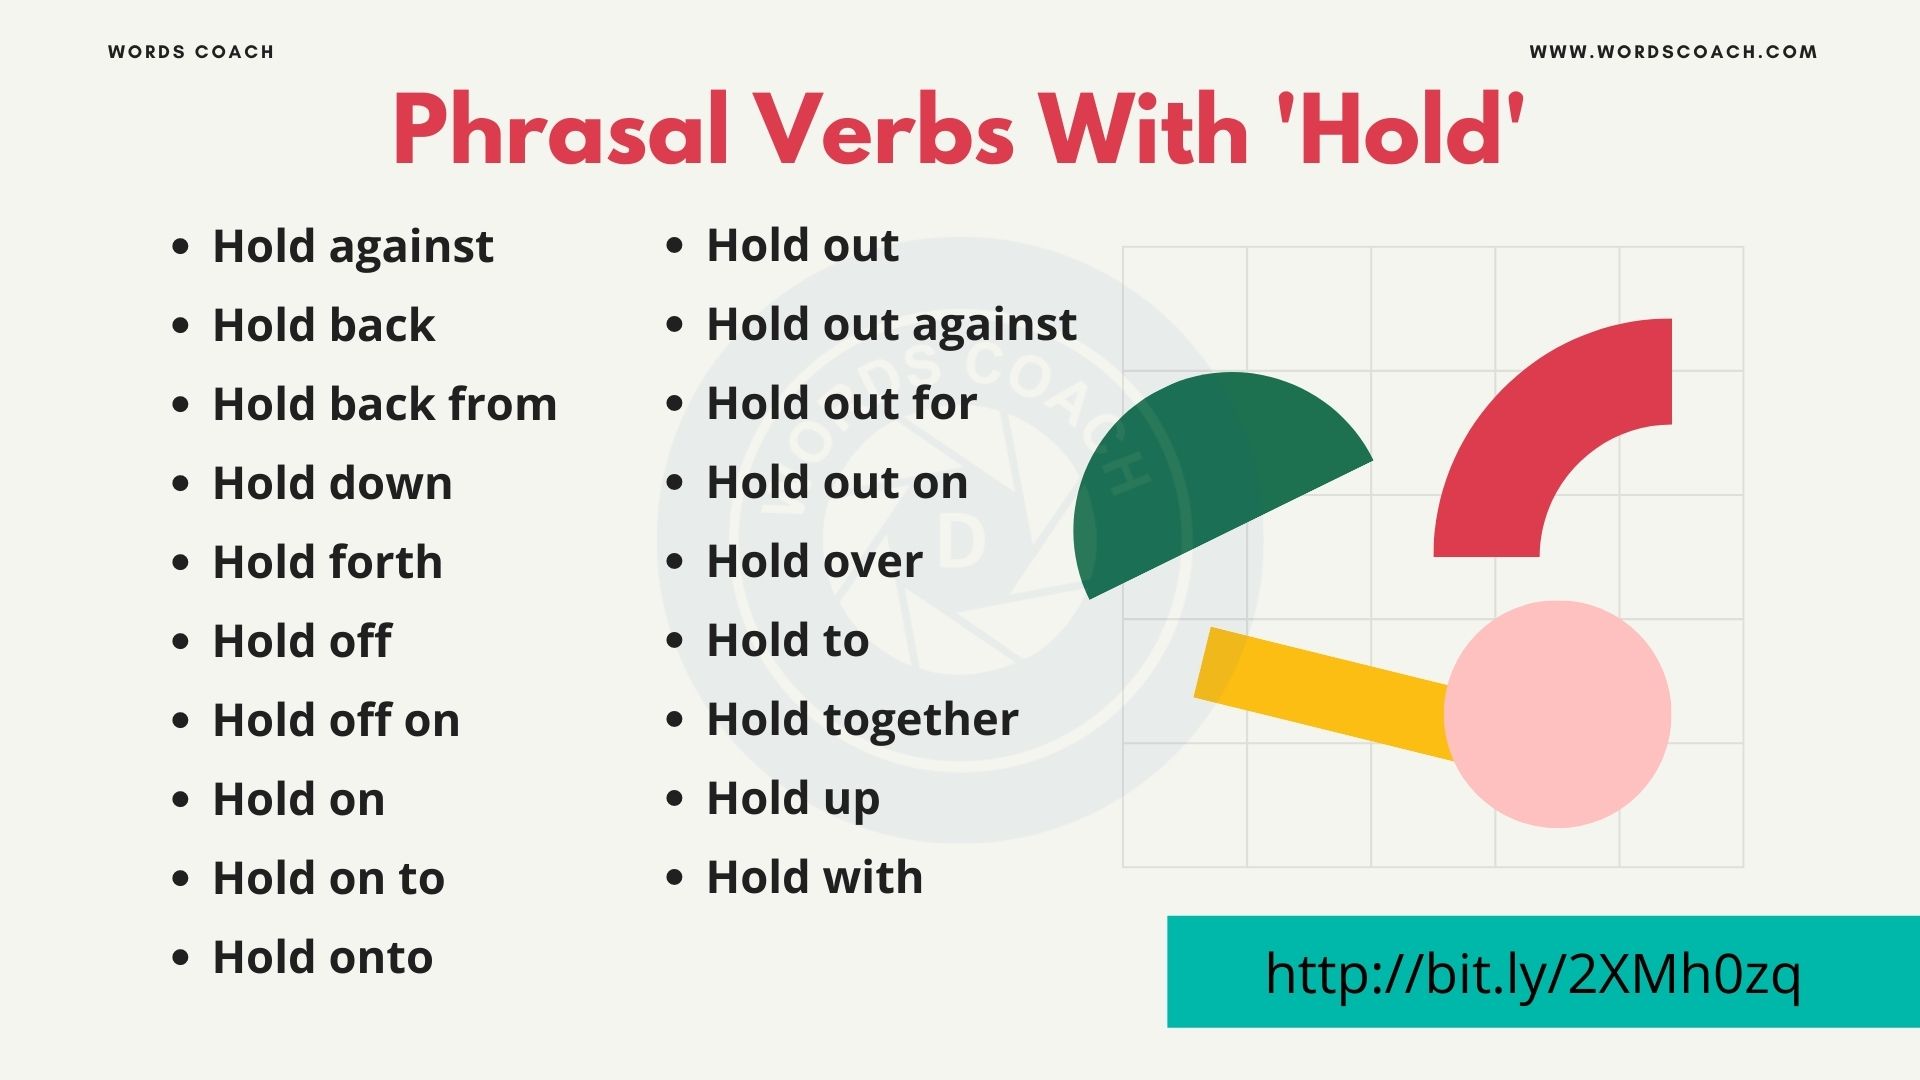 Phrasal Verbs With 'Hold'